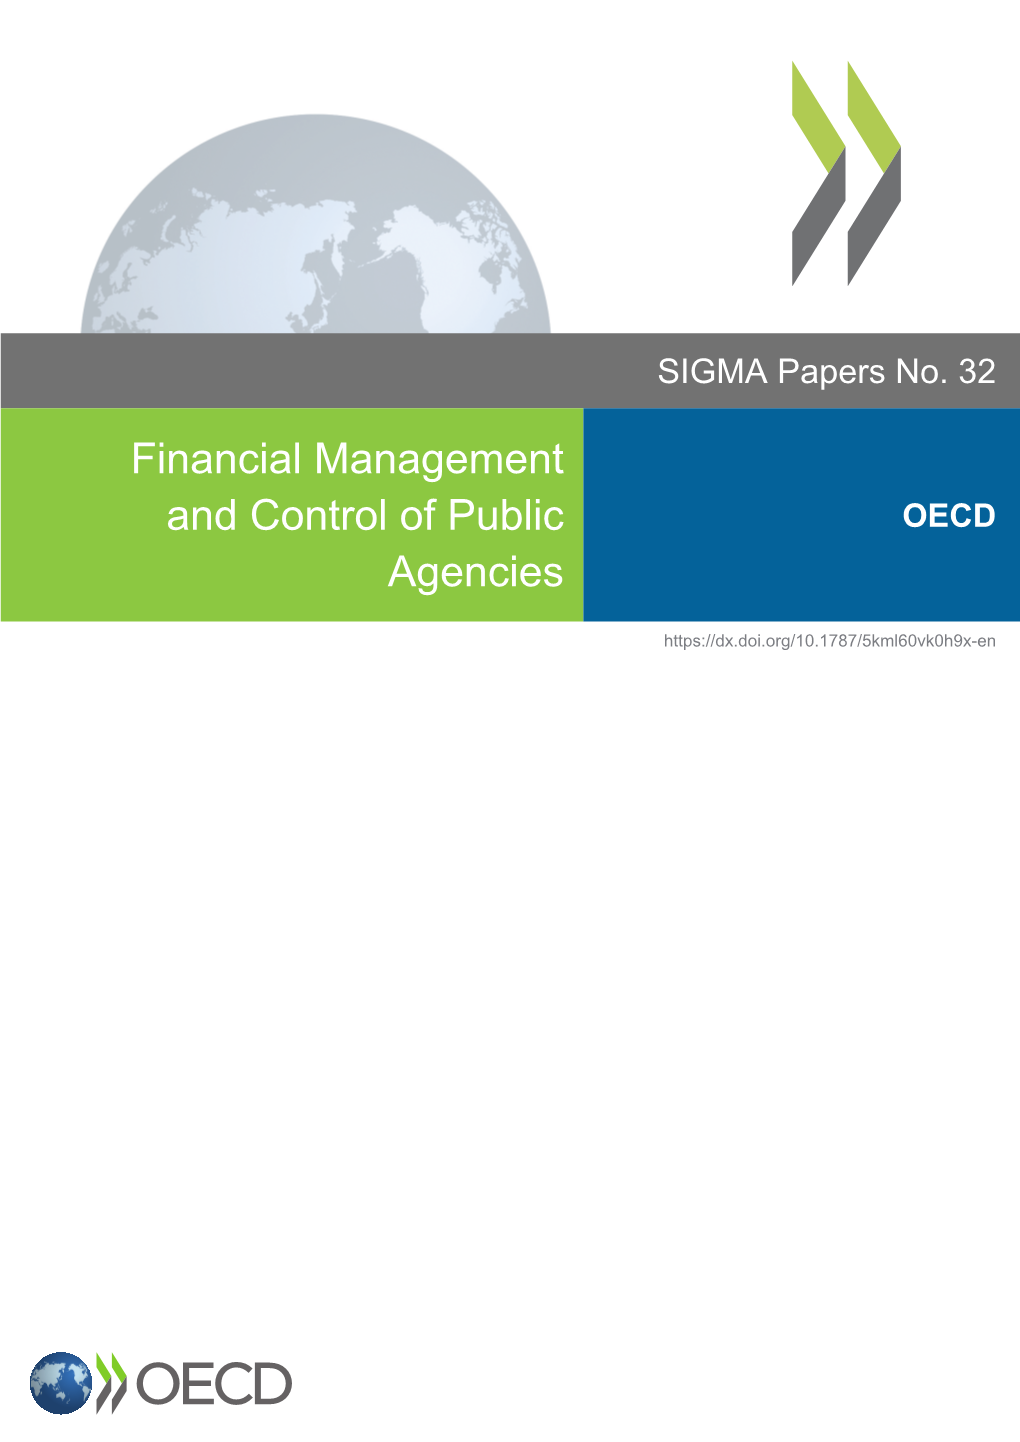 Financial Management and Control of Public Agencies